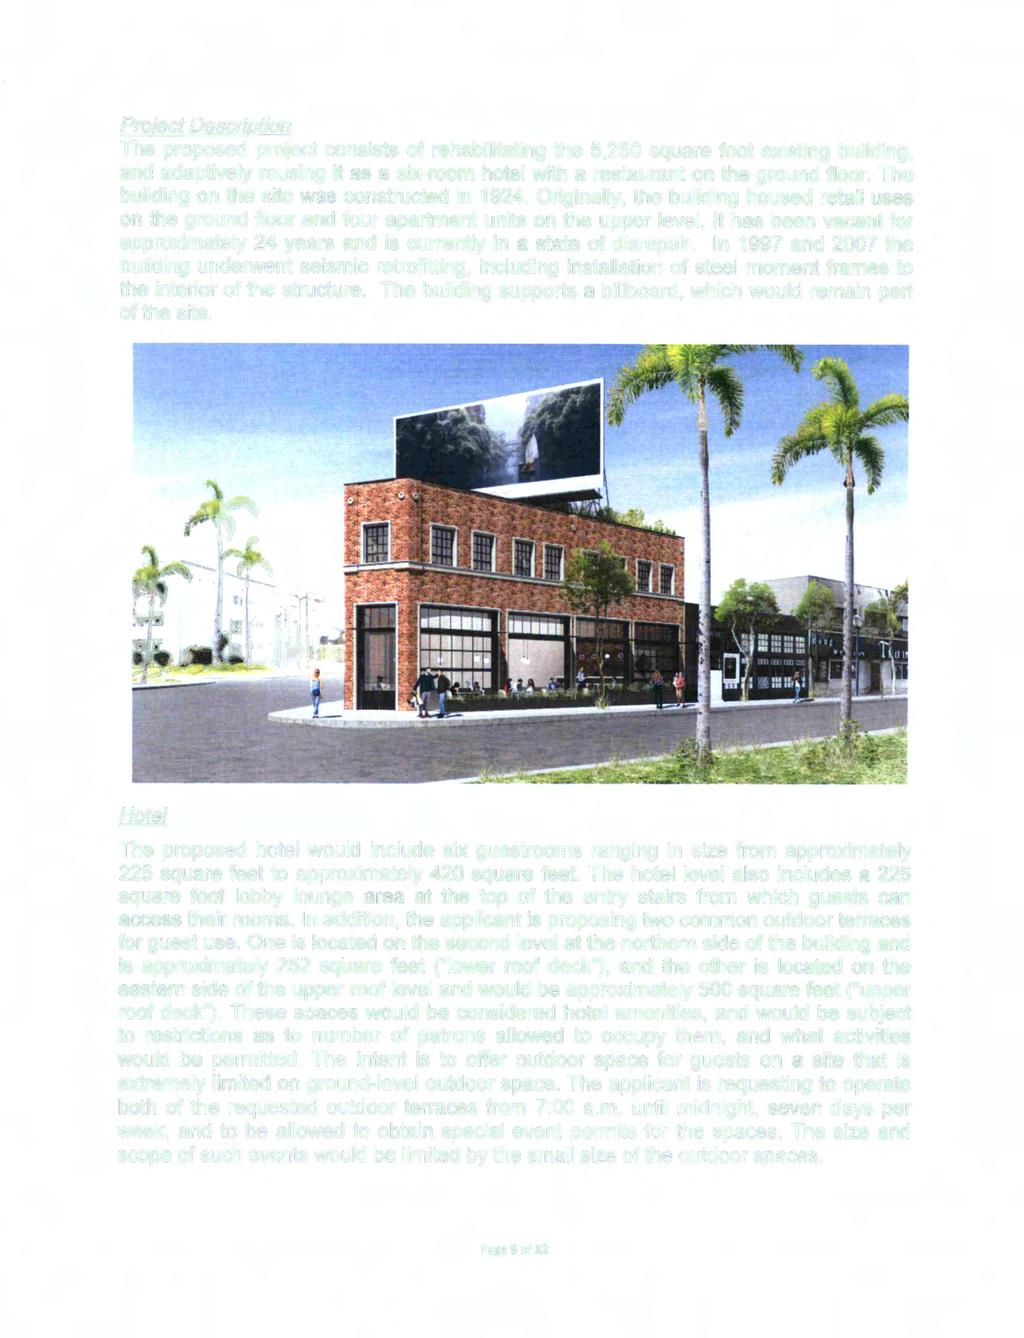 Project Description The proposed project consists of rehabilitating the 5,250 square foot existing building, and adaptively reusing it as a six-room hotel with a restaurant on the ground floor.